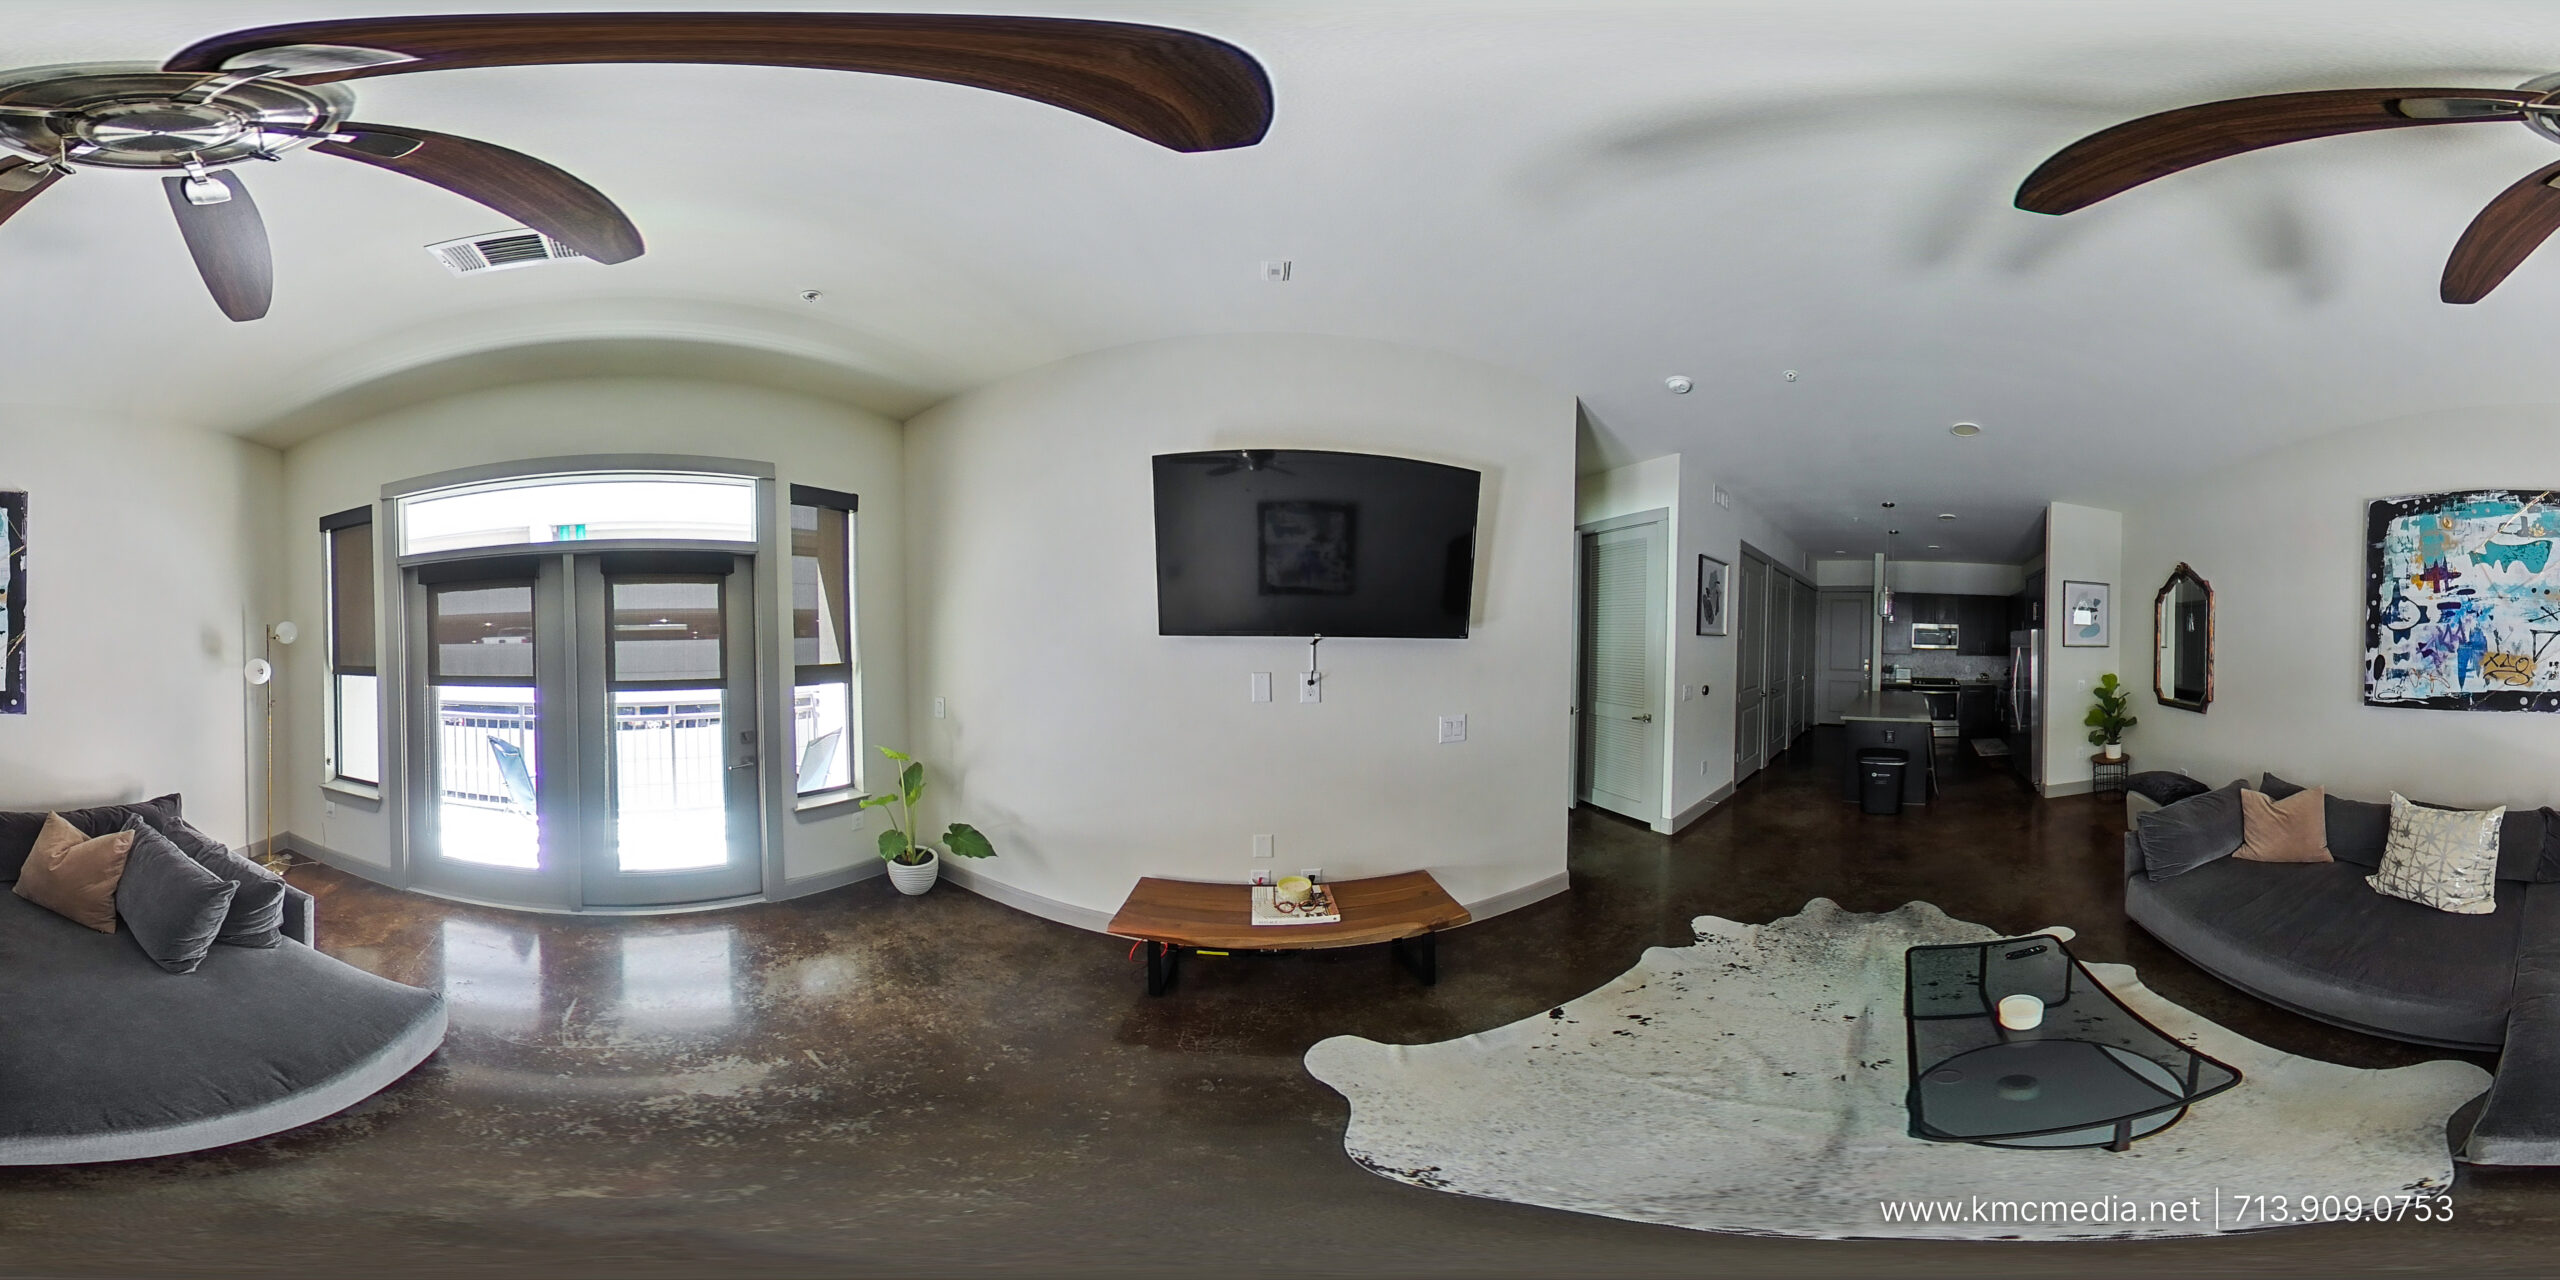 Real estate photography 360° panorama of residential home’s living room area fully interior designed.